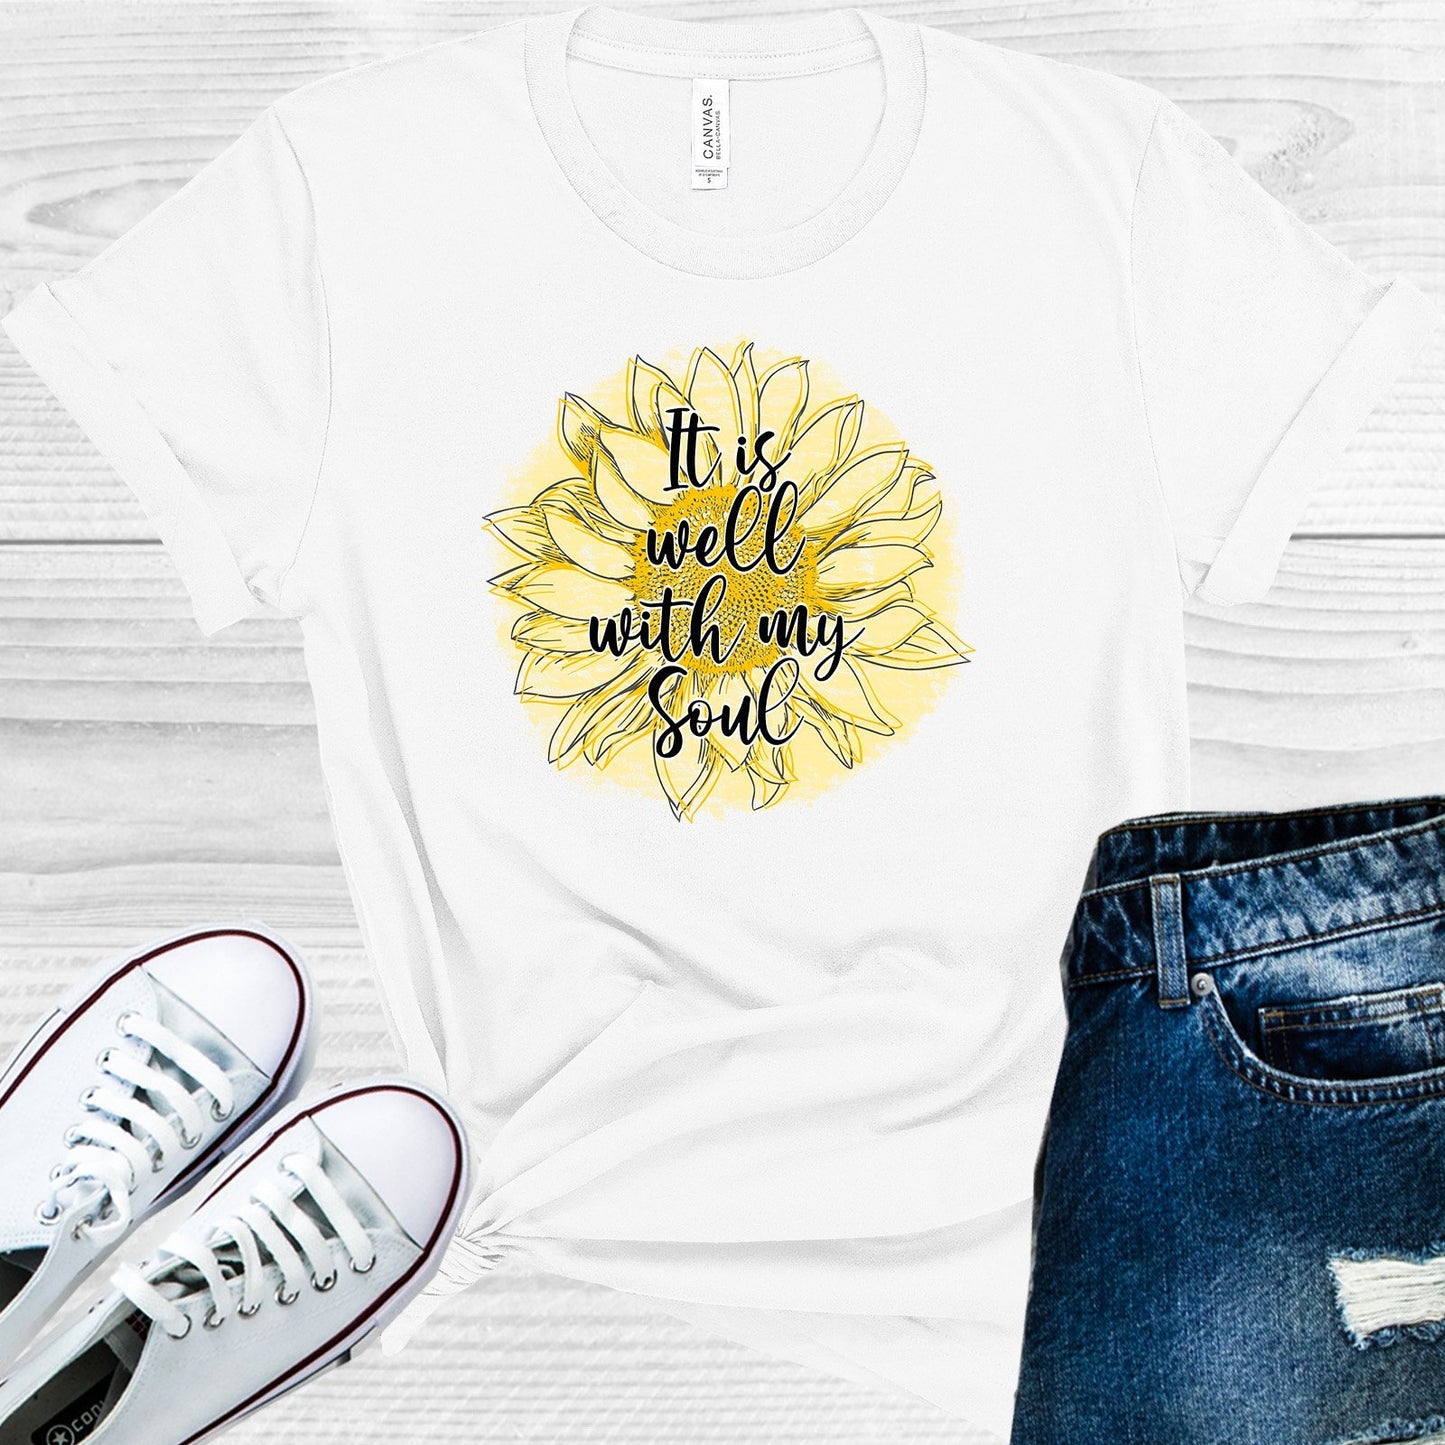 It Is Well With My Soul Graphic Tee Graphic Tee